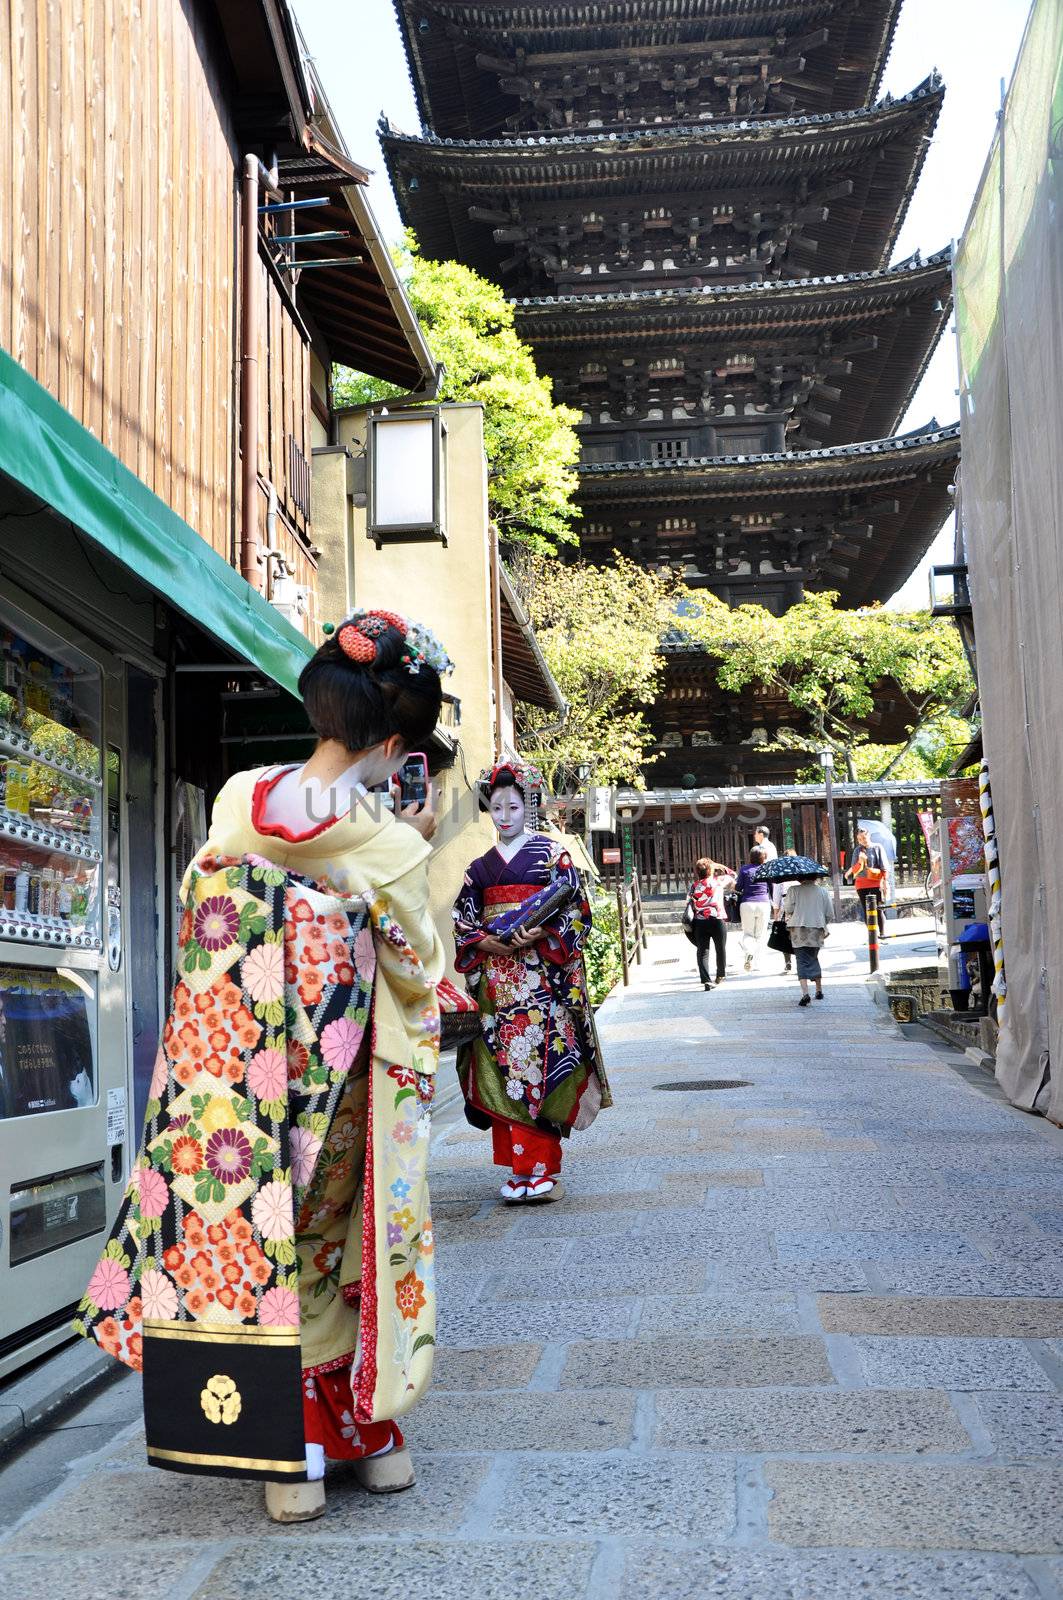 KYOTO, JAPAN - OCT 21 2012: Japanese ladies in traditional dress  on a street leading to Kiyomizu Temple on October 21 2012. Kiyomizu is a famous temple in Kyoto built in year 778.